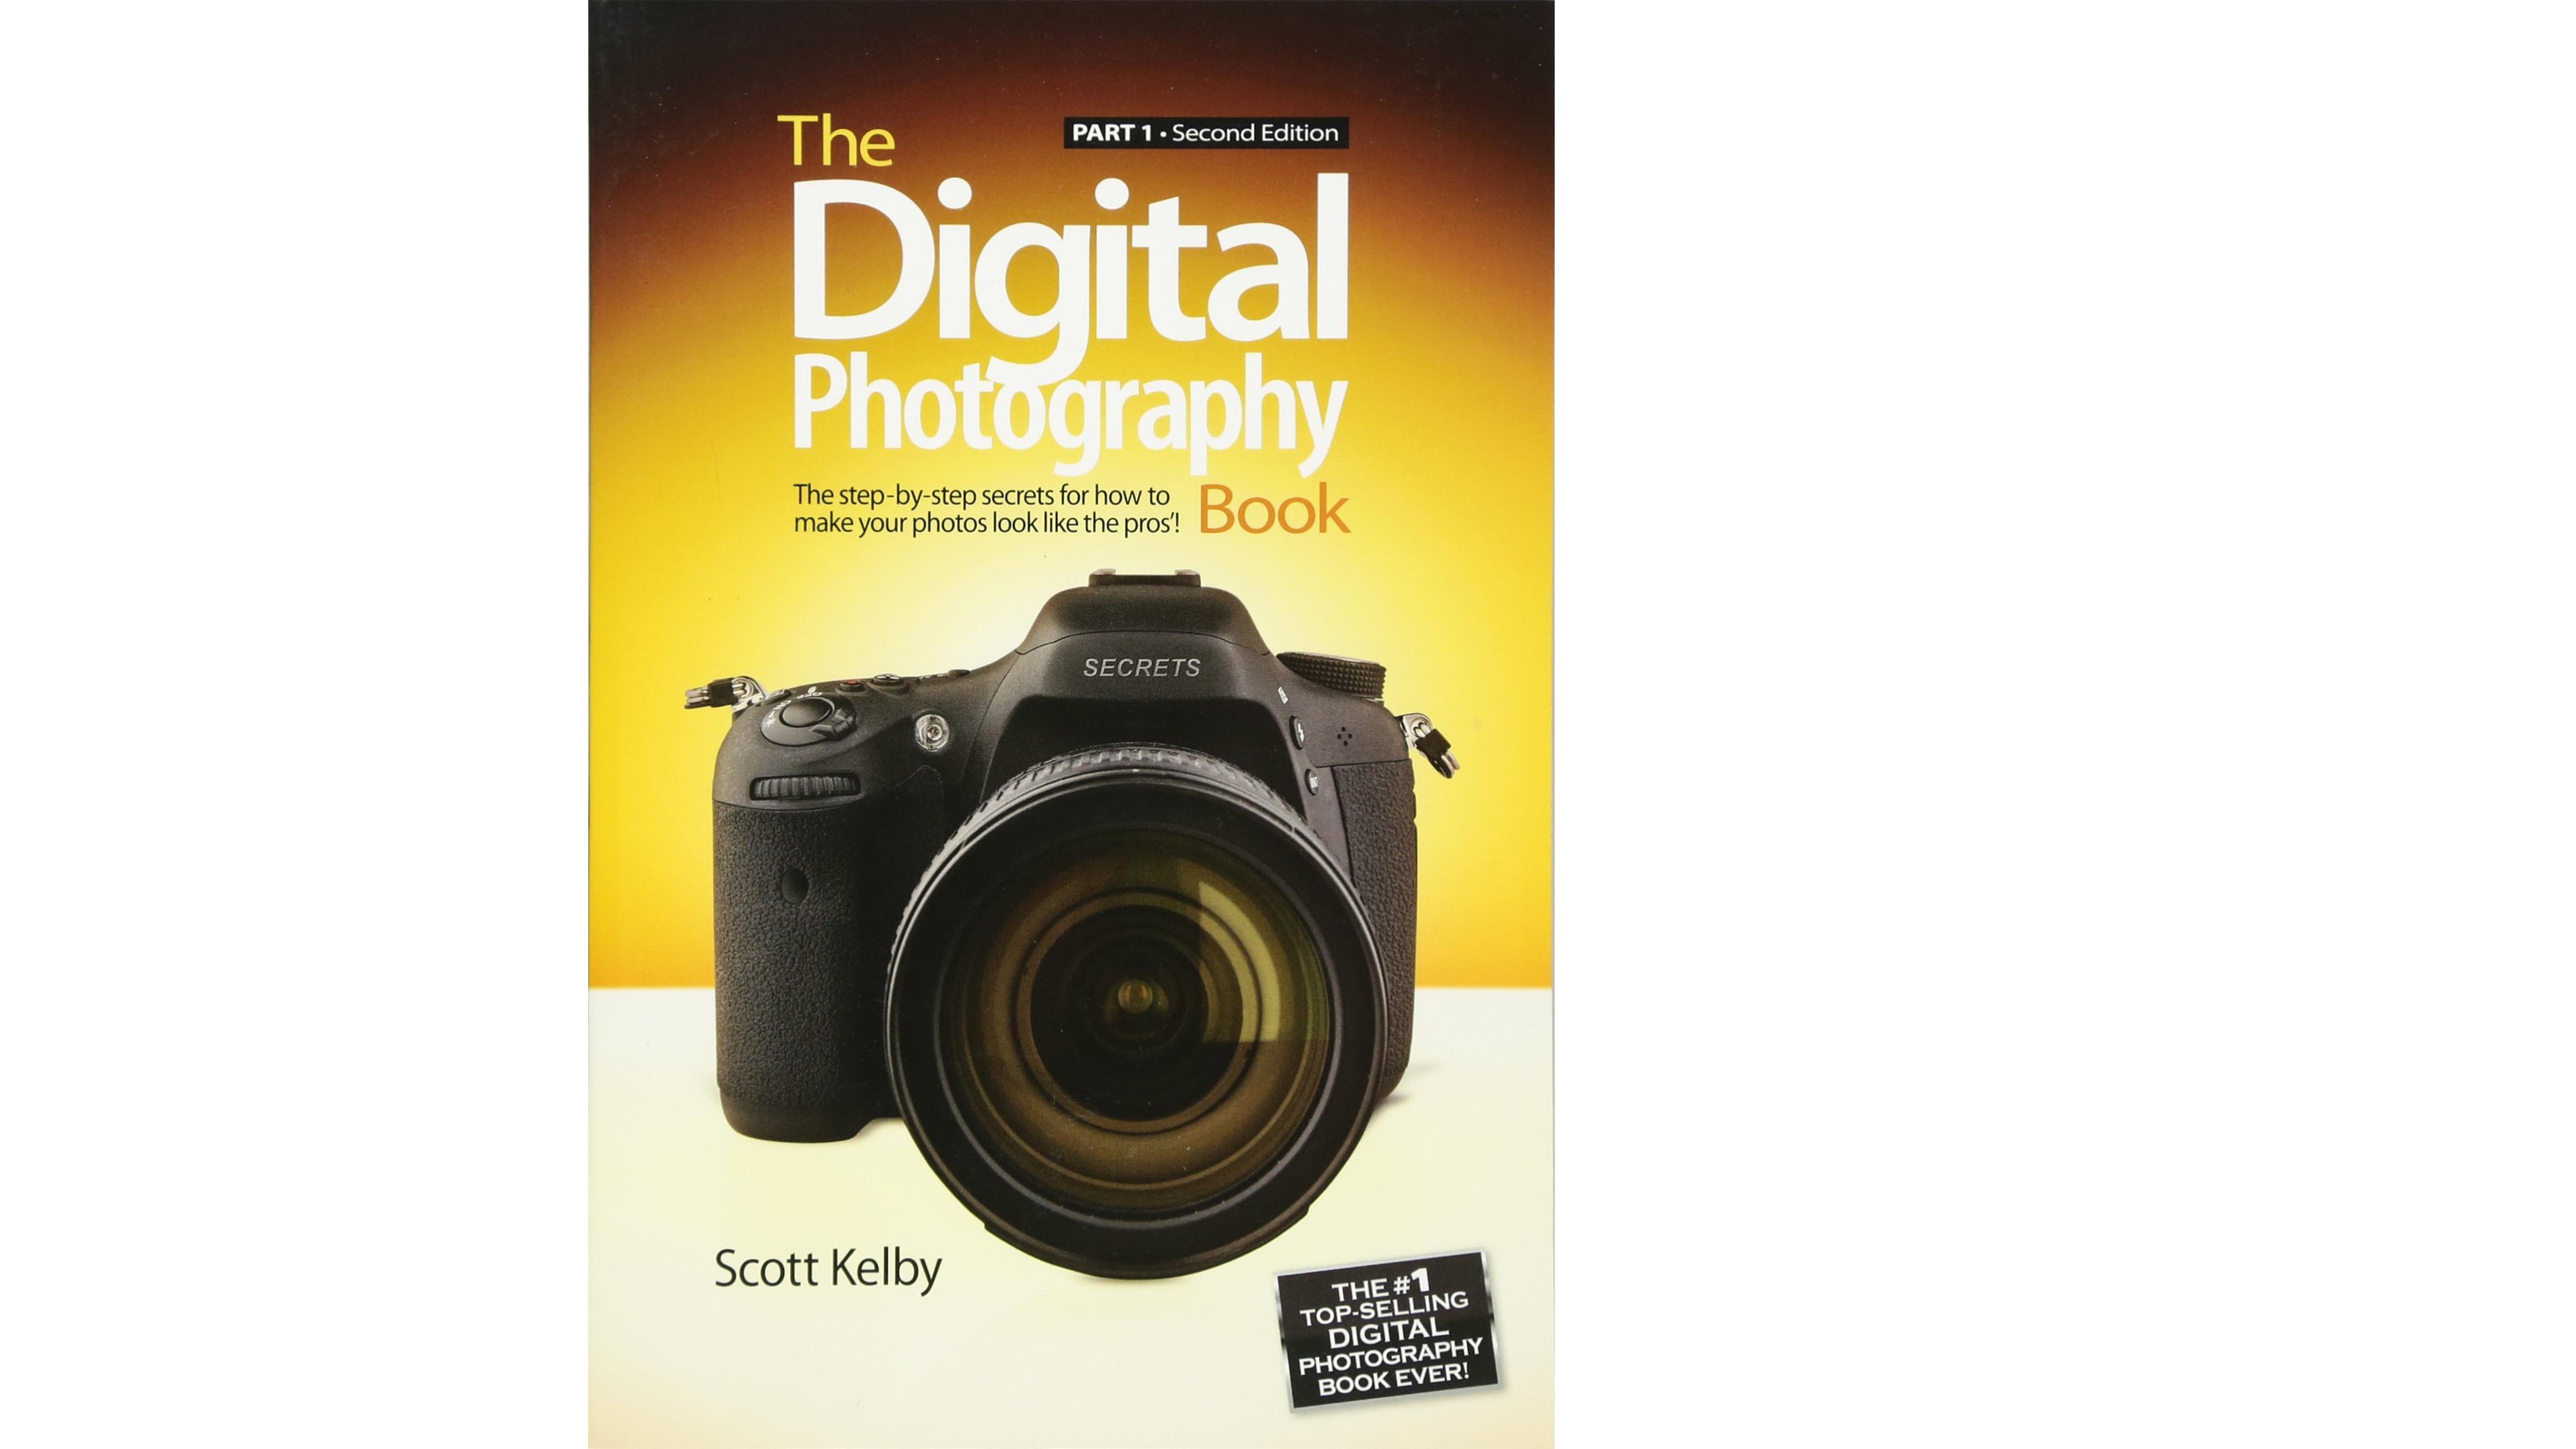 Cover of The Digital Photography Book: Part 1, one of the best books on photography